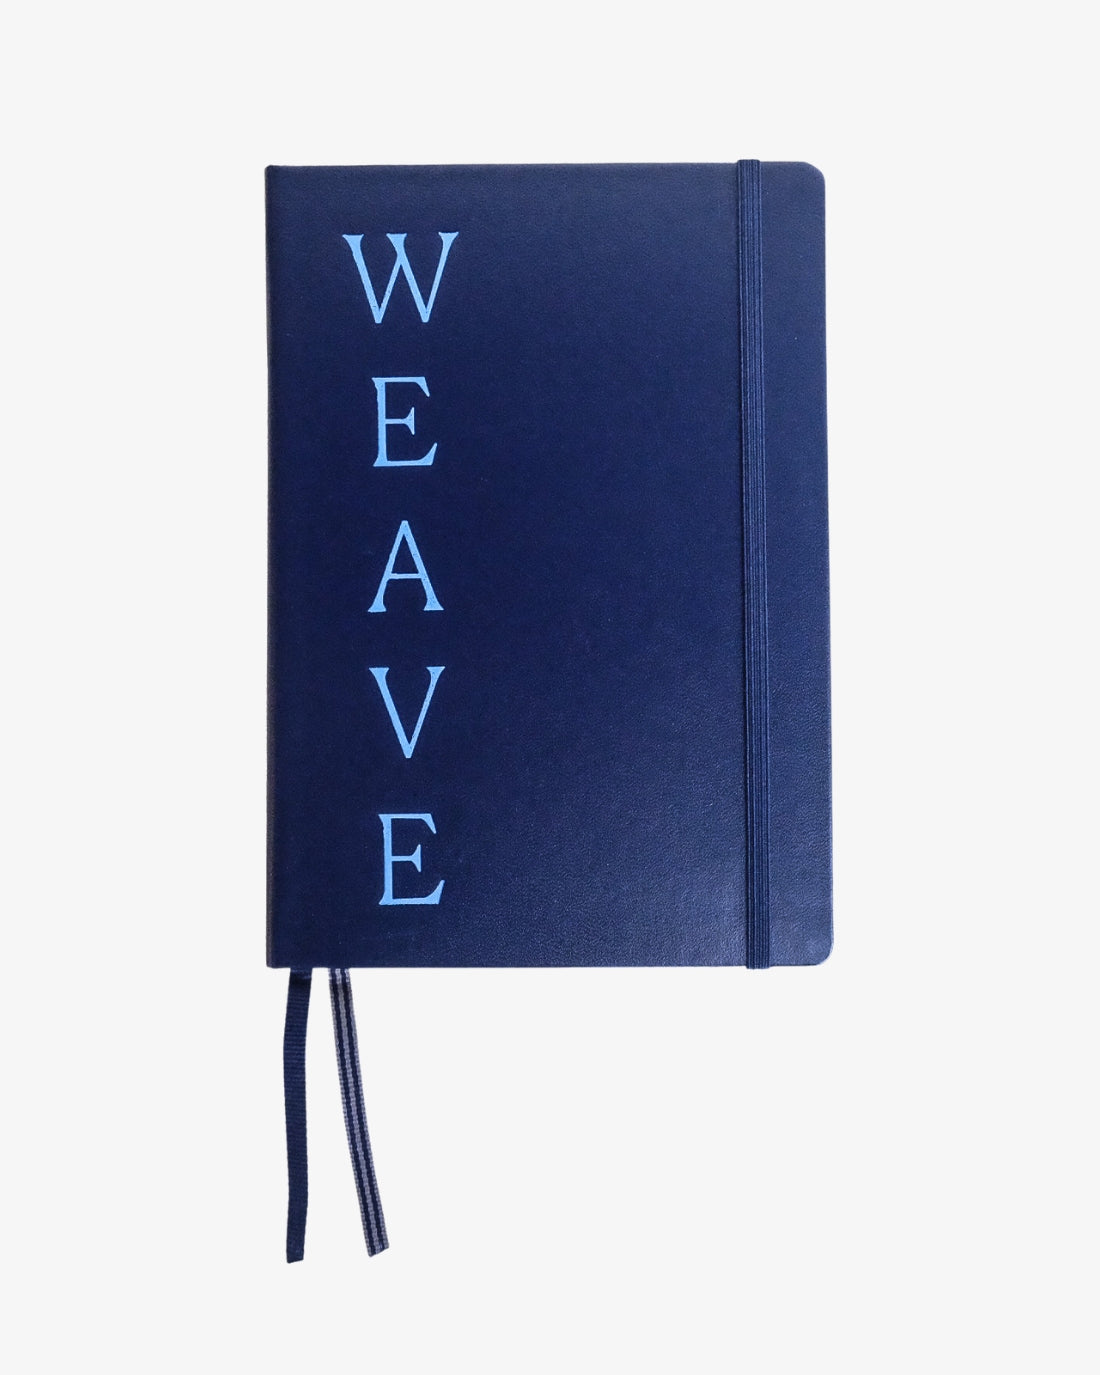 WEAVE Notebook by Tatter